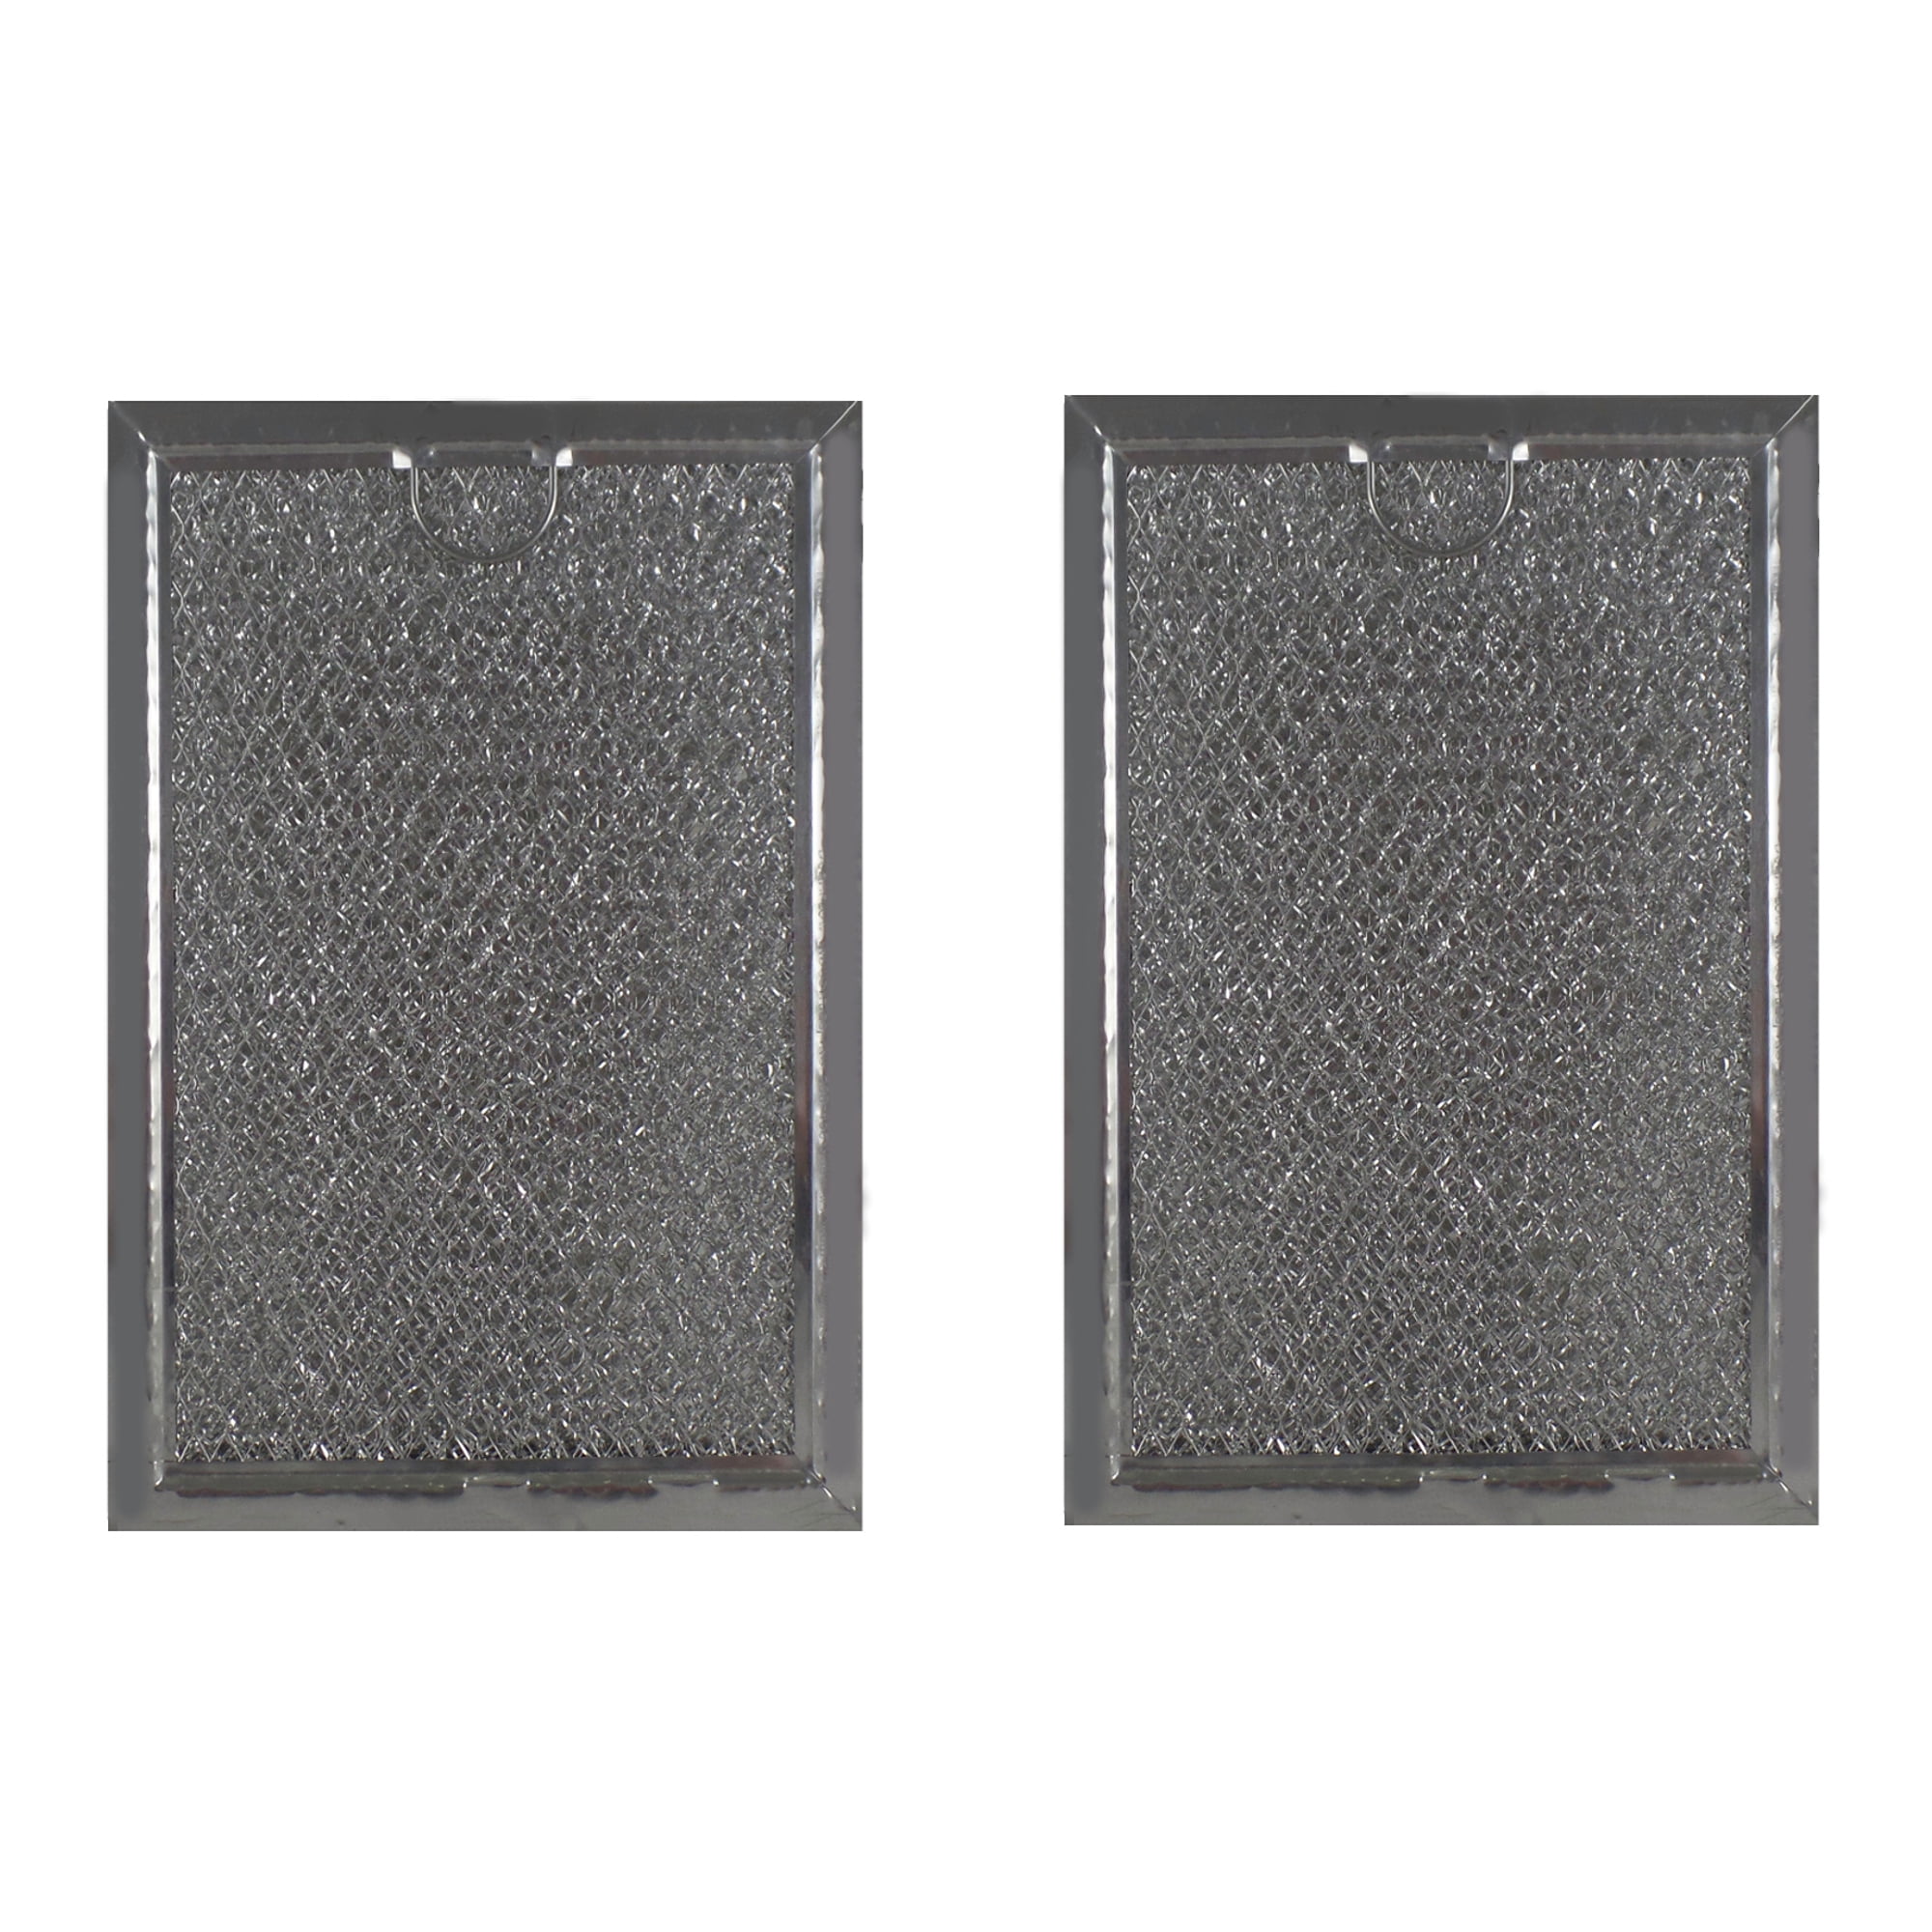 2 Aluminum Mesh Microwave Grease Filters for Frigidaire 5304478913 